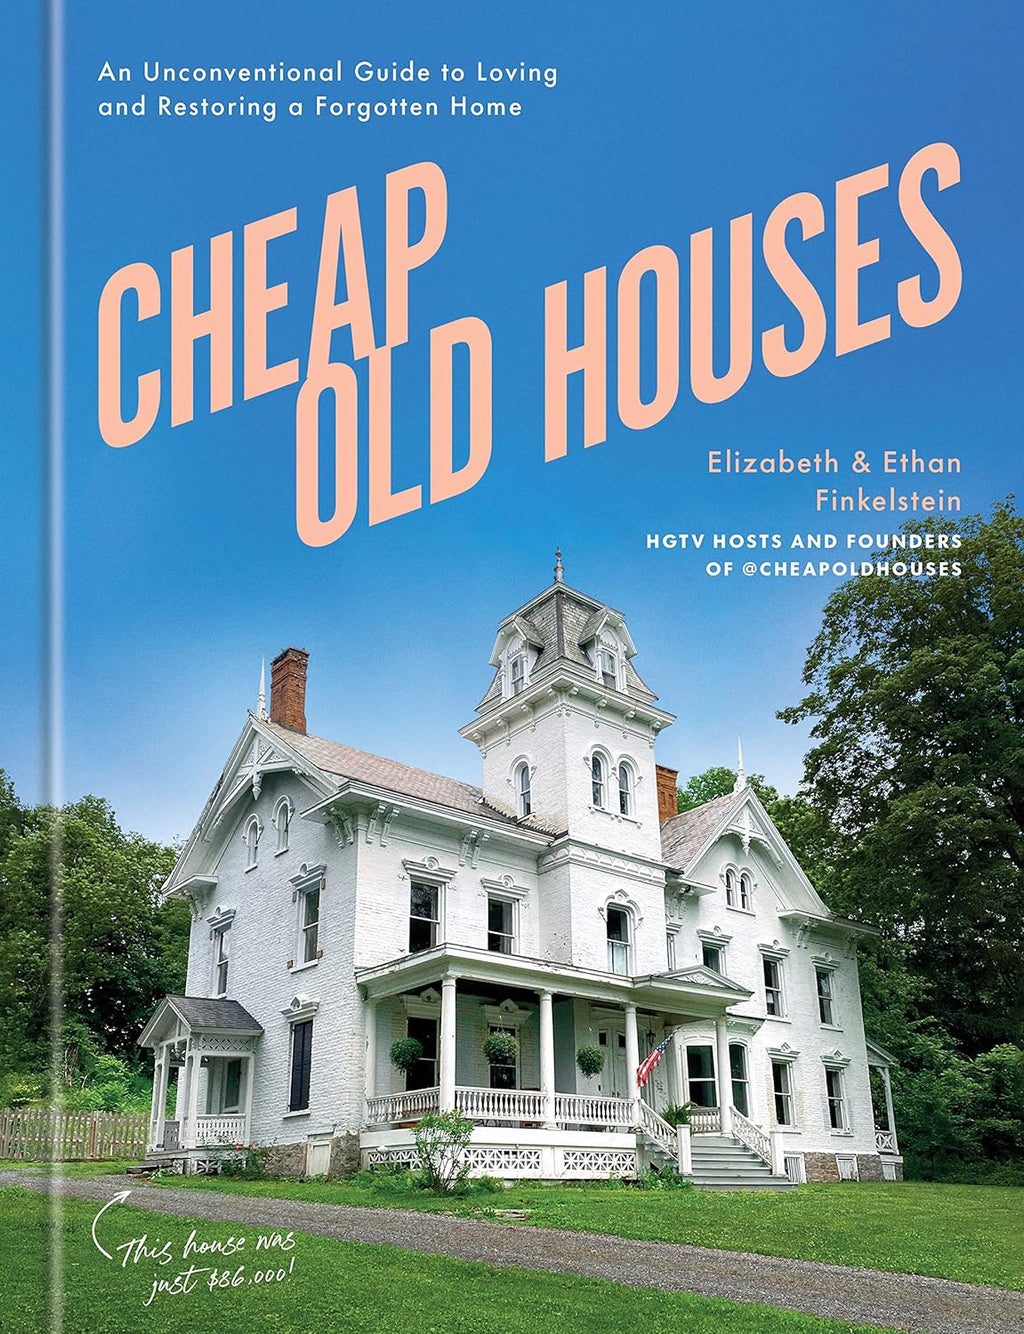 CHEAP OLD HOUSES --  AN UNCONVENTIONAL GUIDE TO LOVING + RESTORING A FORGOTTEN HOME